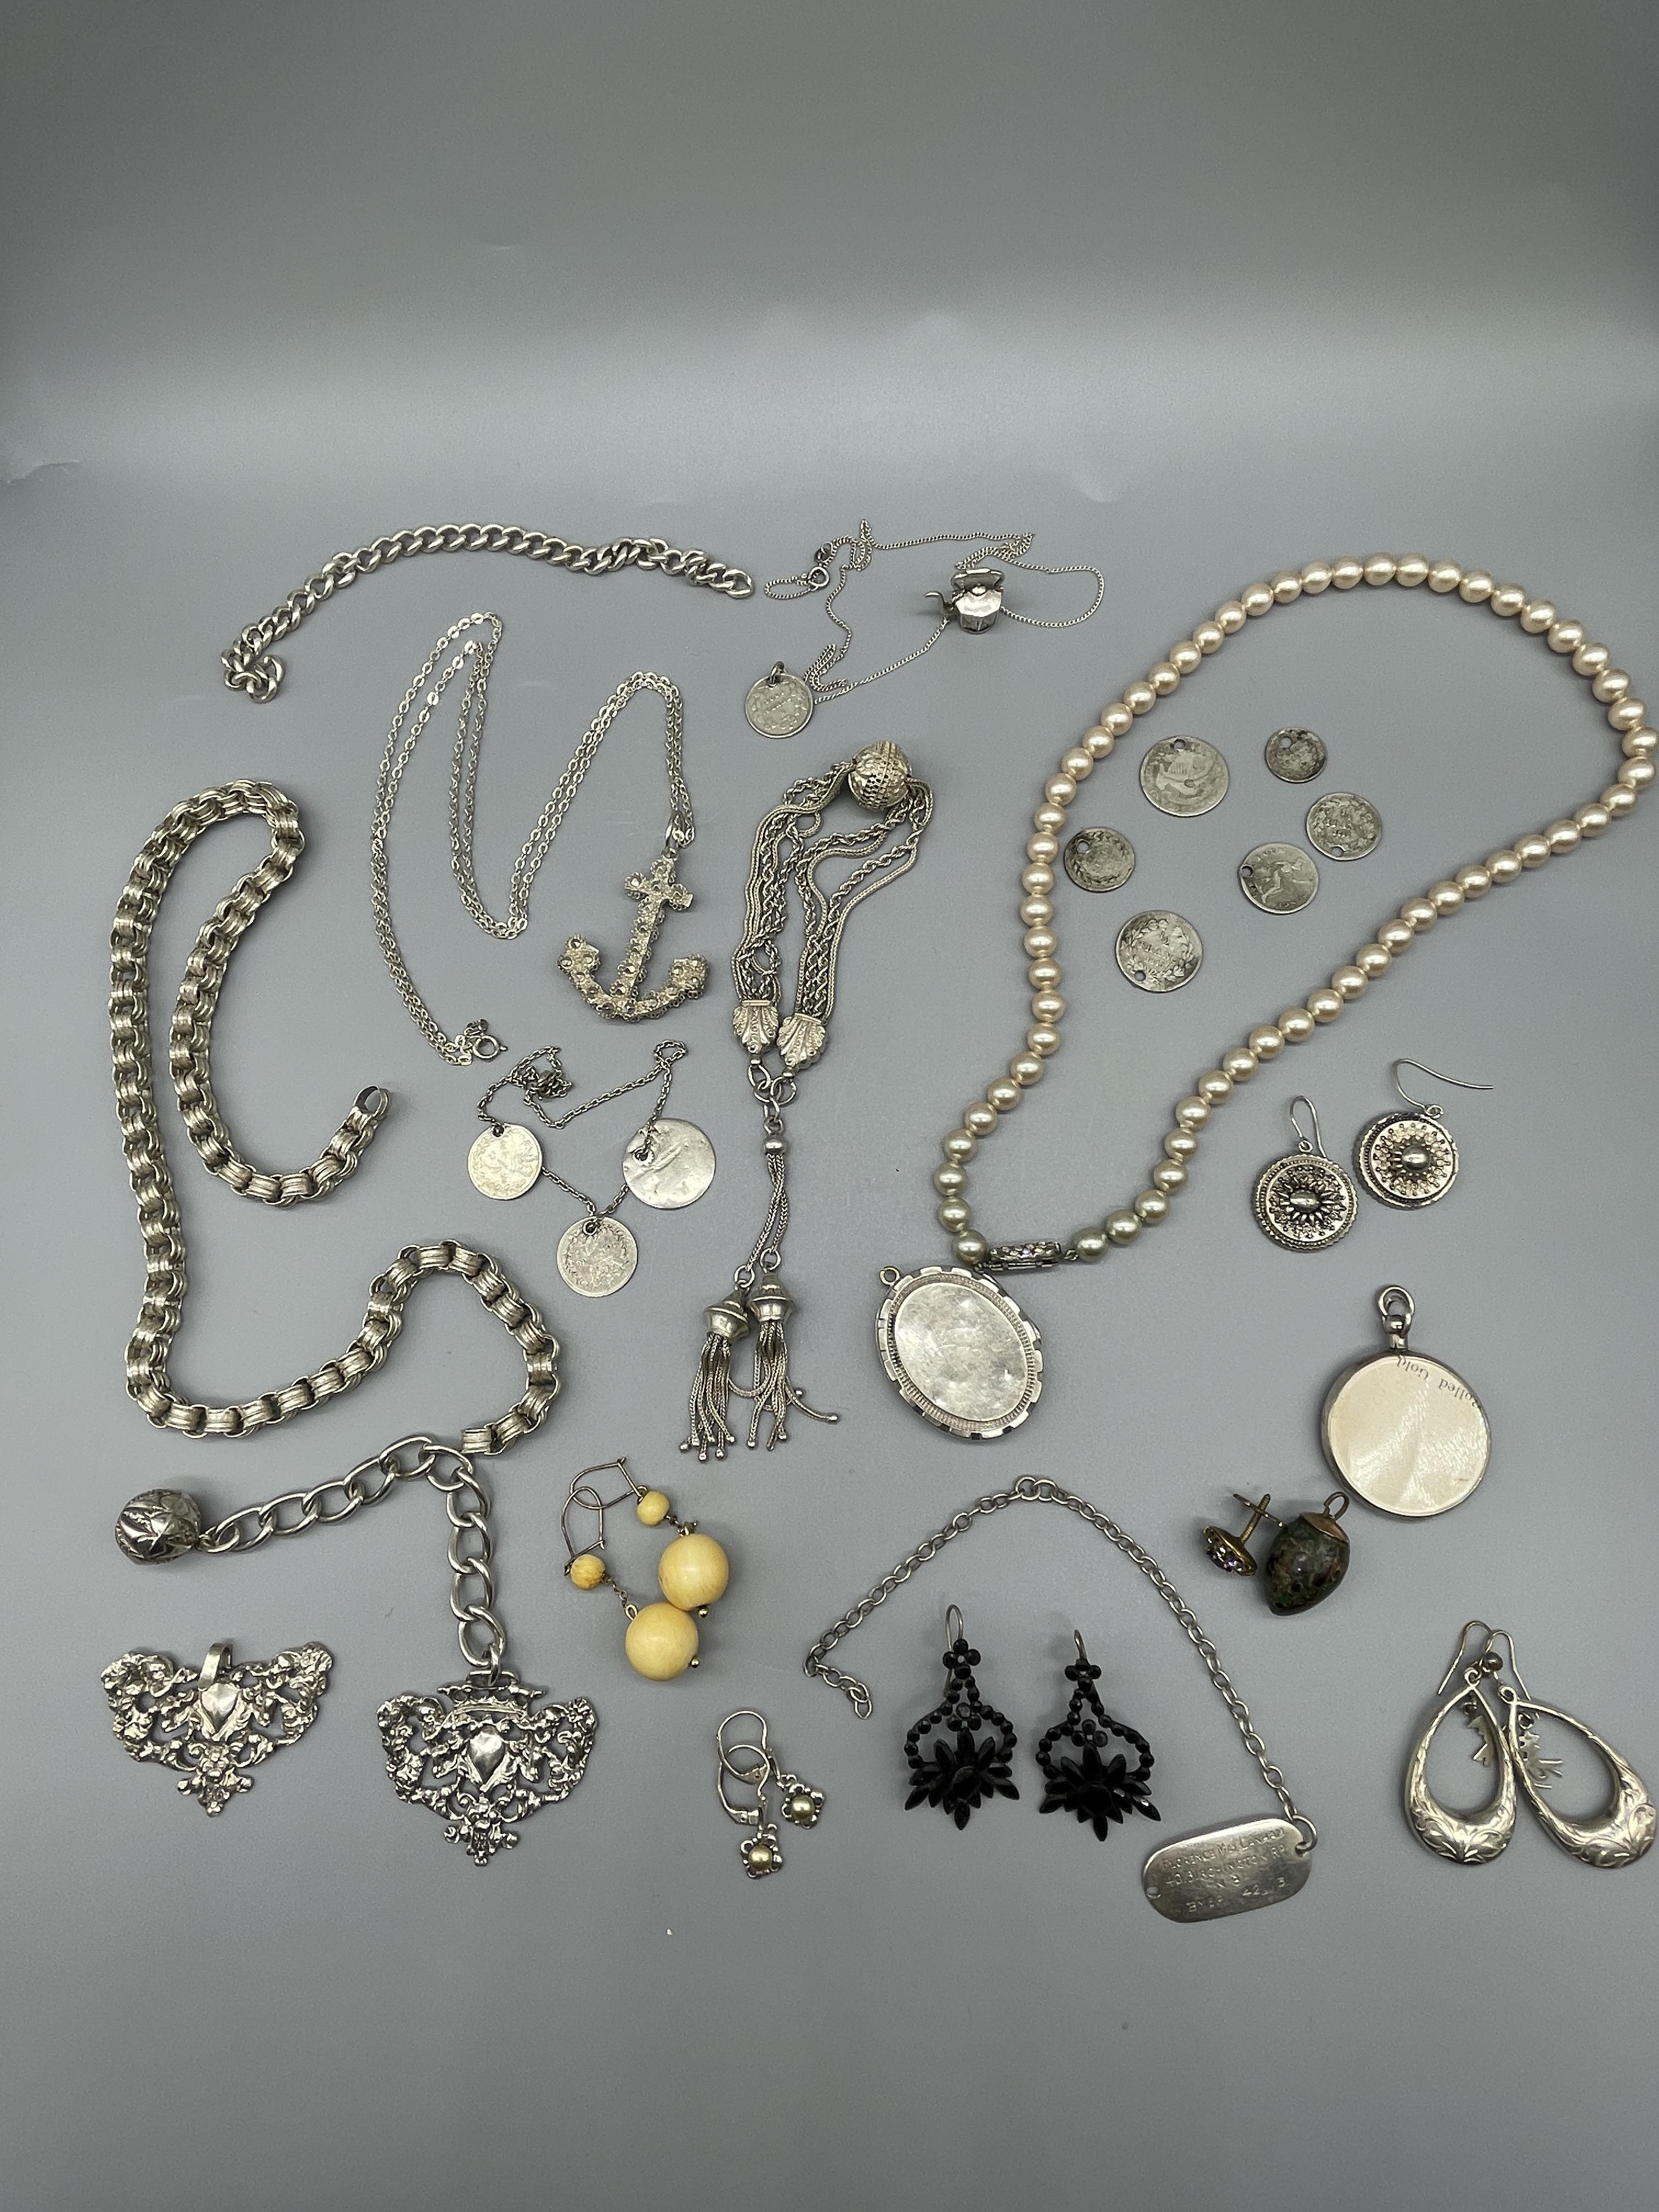 Silver Jewellery and dress jewellery - Image 2 of 7